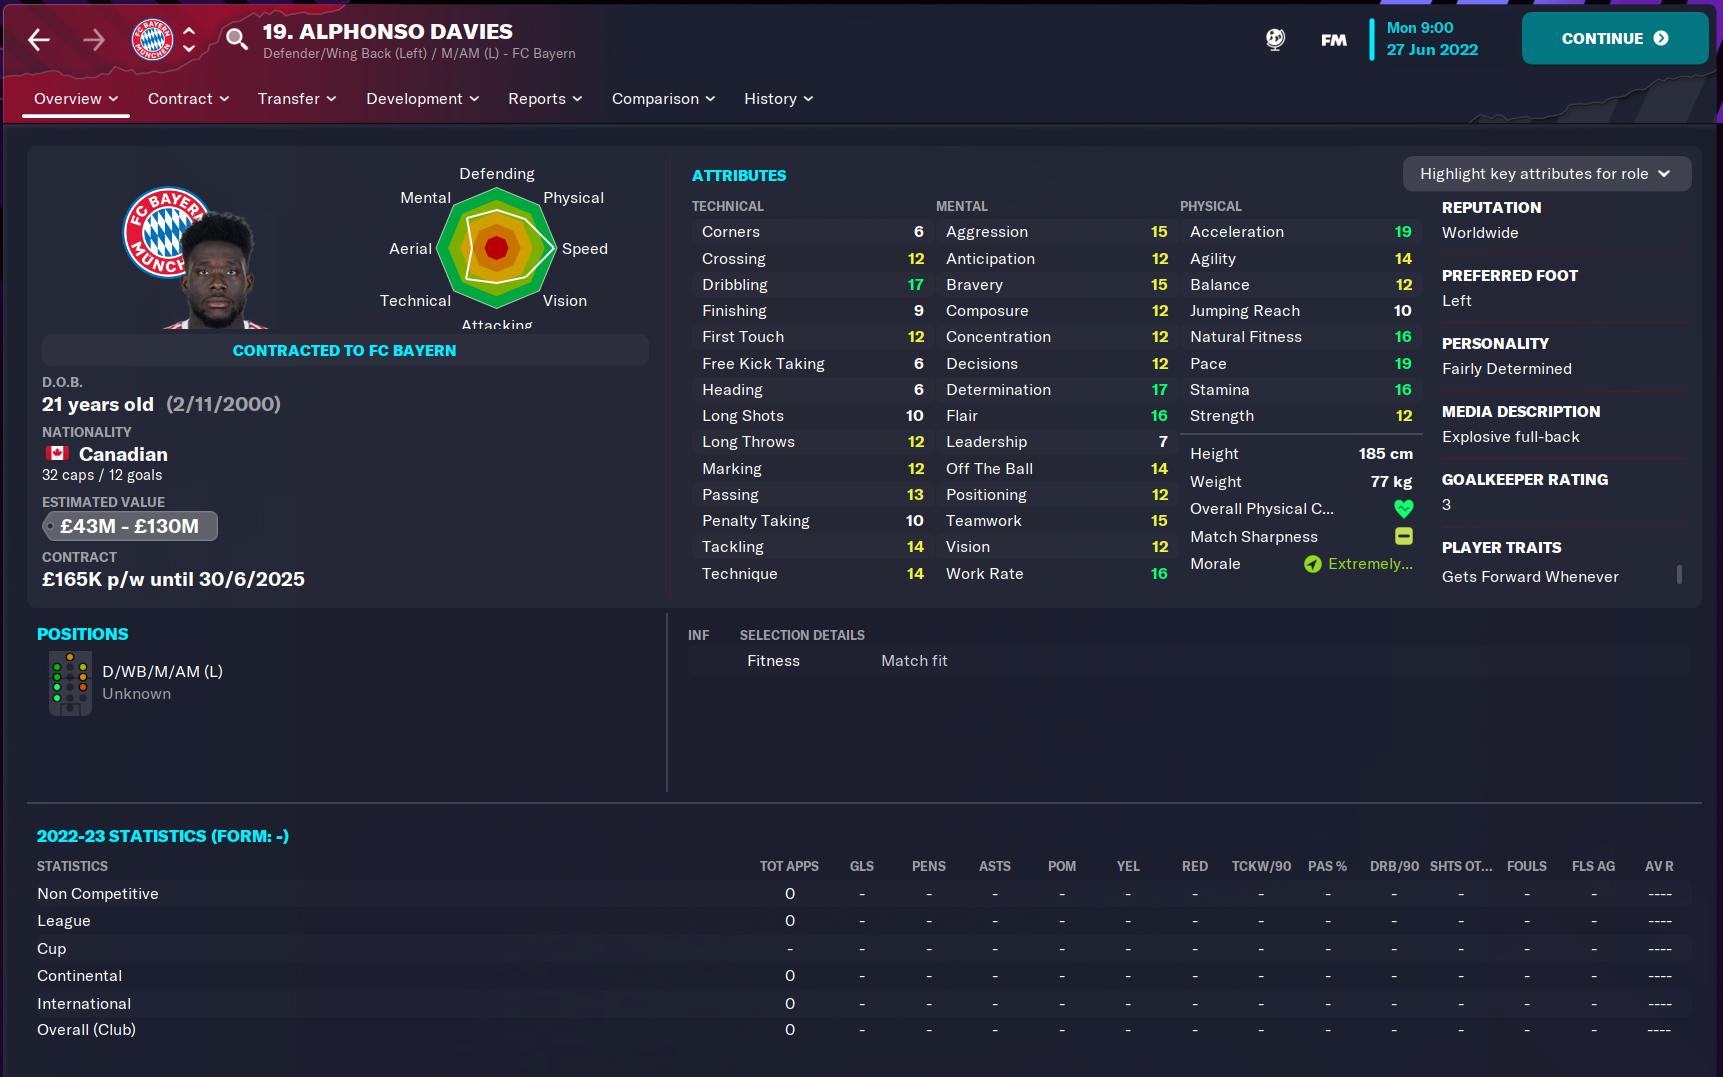 The MOST LIKELY TO SUCCEED Wonderkids in Football Manager 2023